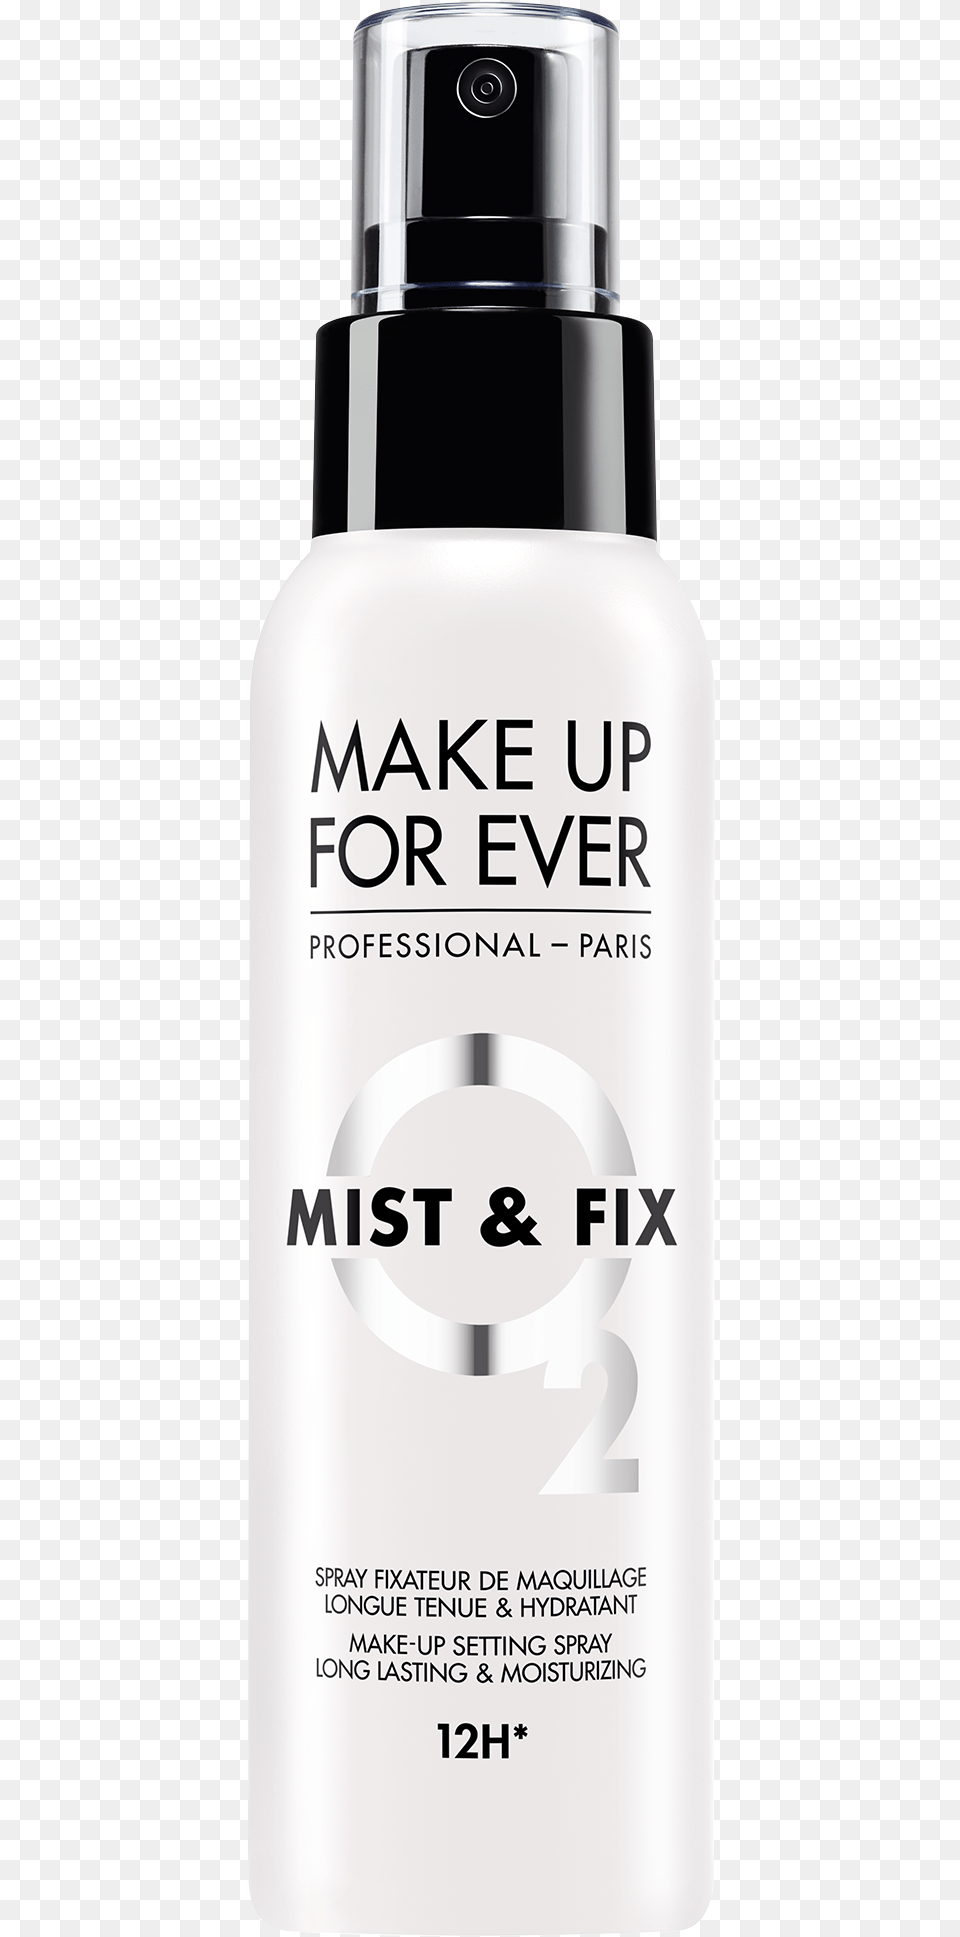 Quotitempropquotimage Make Up For Ever Mist Amp Fix, Bottle, Cosmetics, Perfume Png